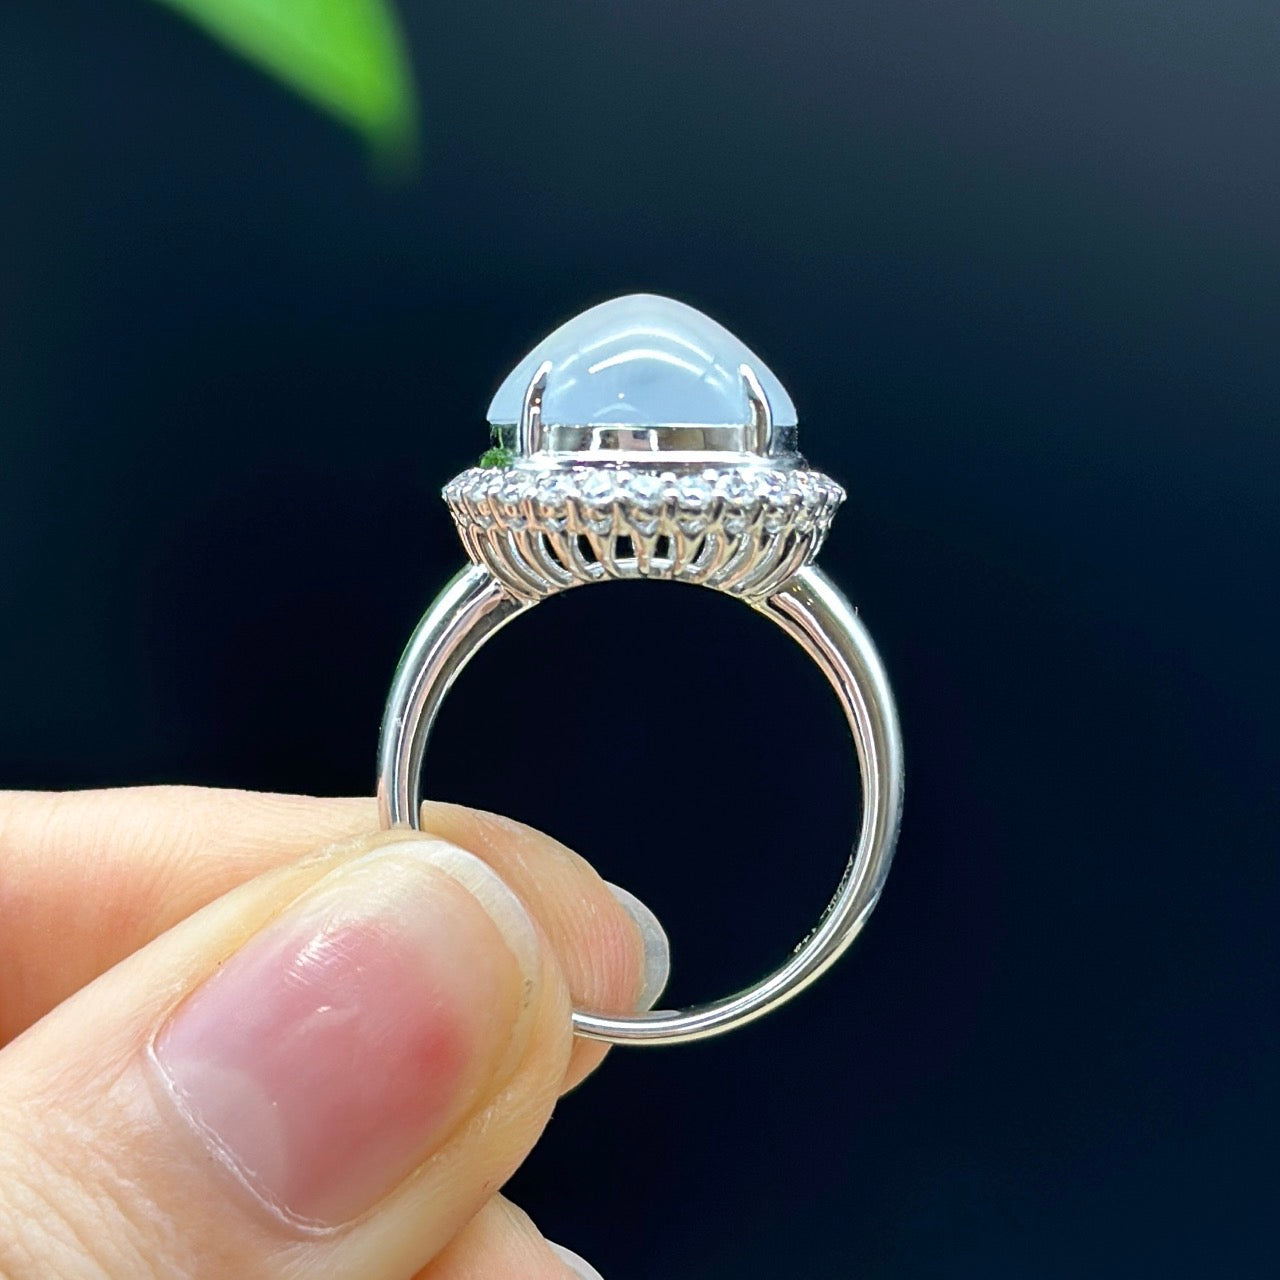 RealJade® "Amelie" 18k White Gold Natural Ice Jadeite Engagement Ring With Diamonds